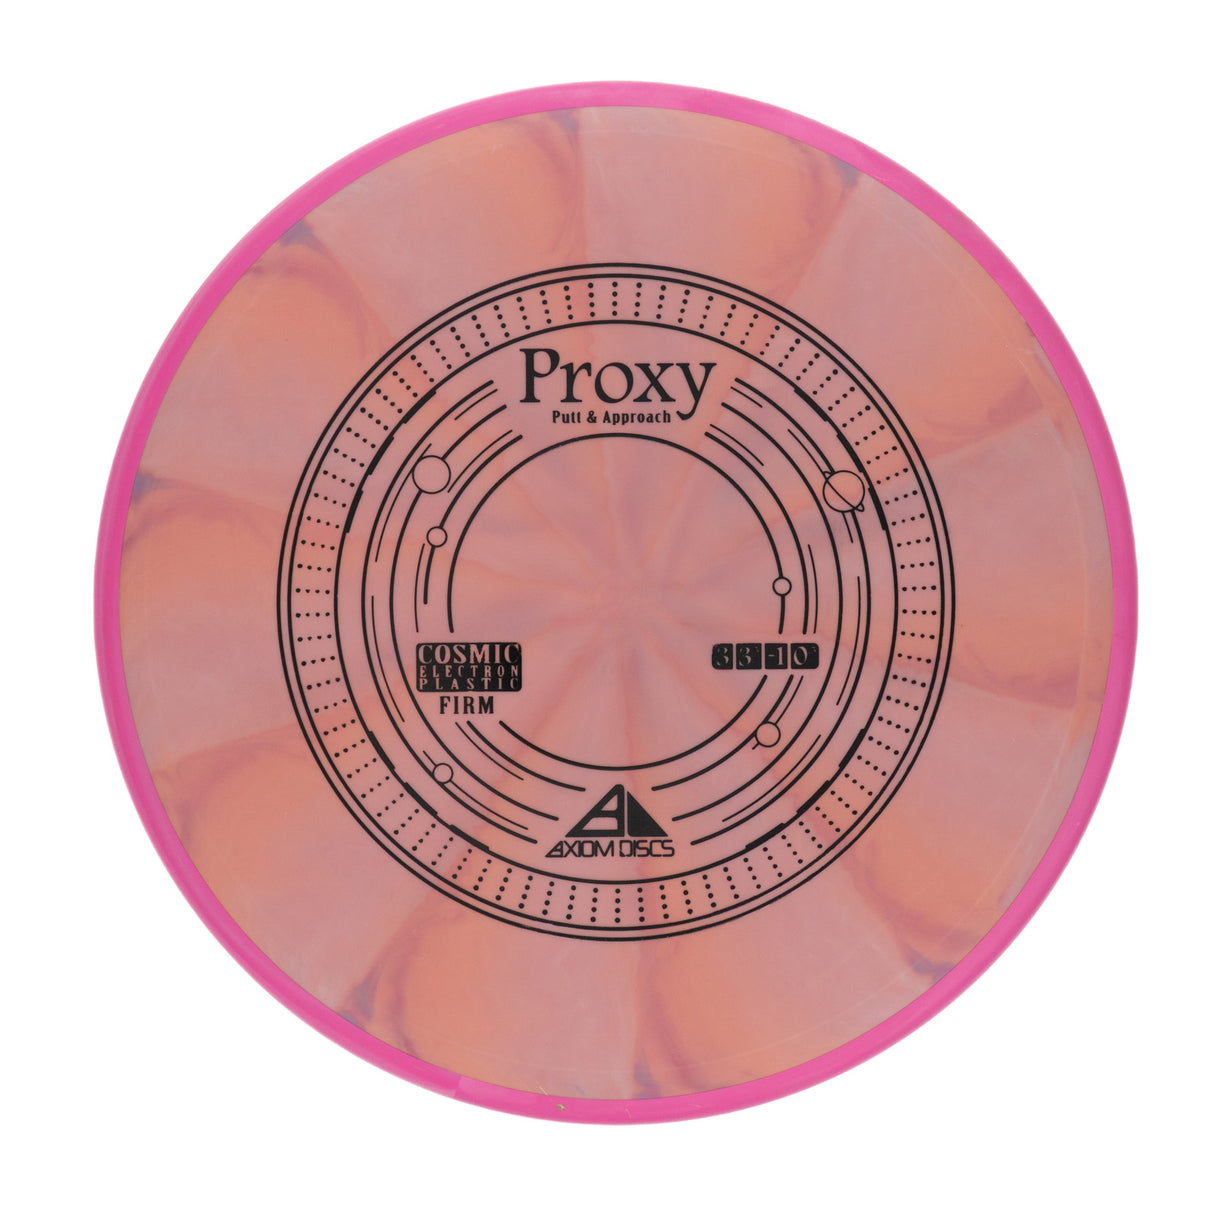 Axiom Proxy - Cosmic Electron Firm 173g | Style 0001